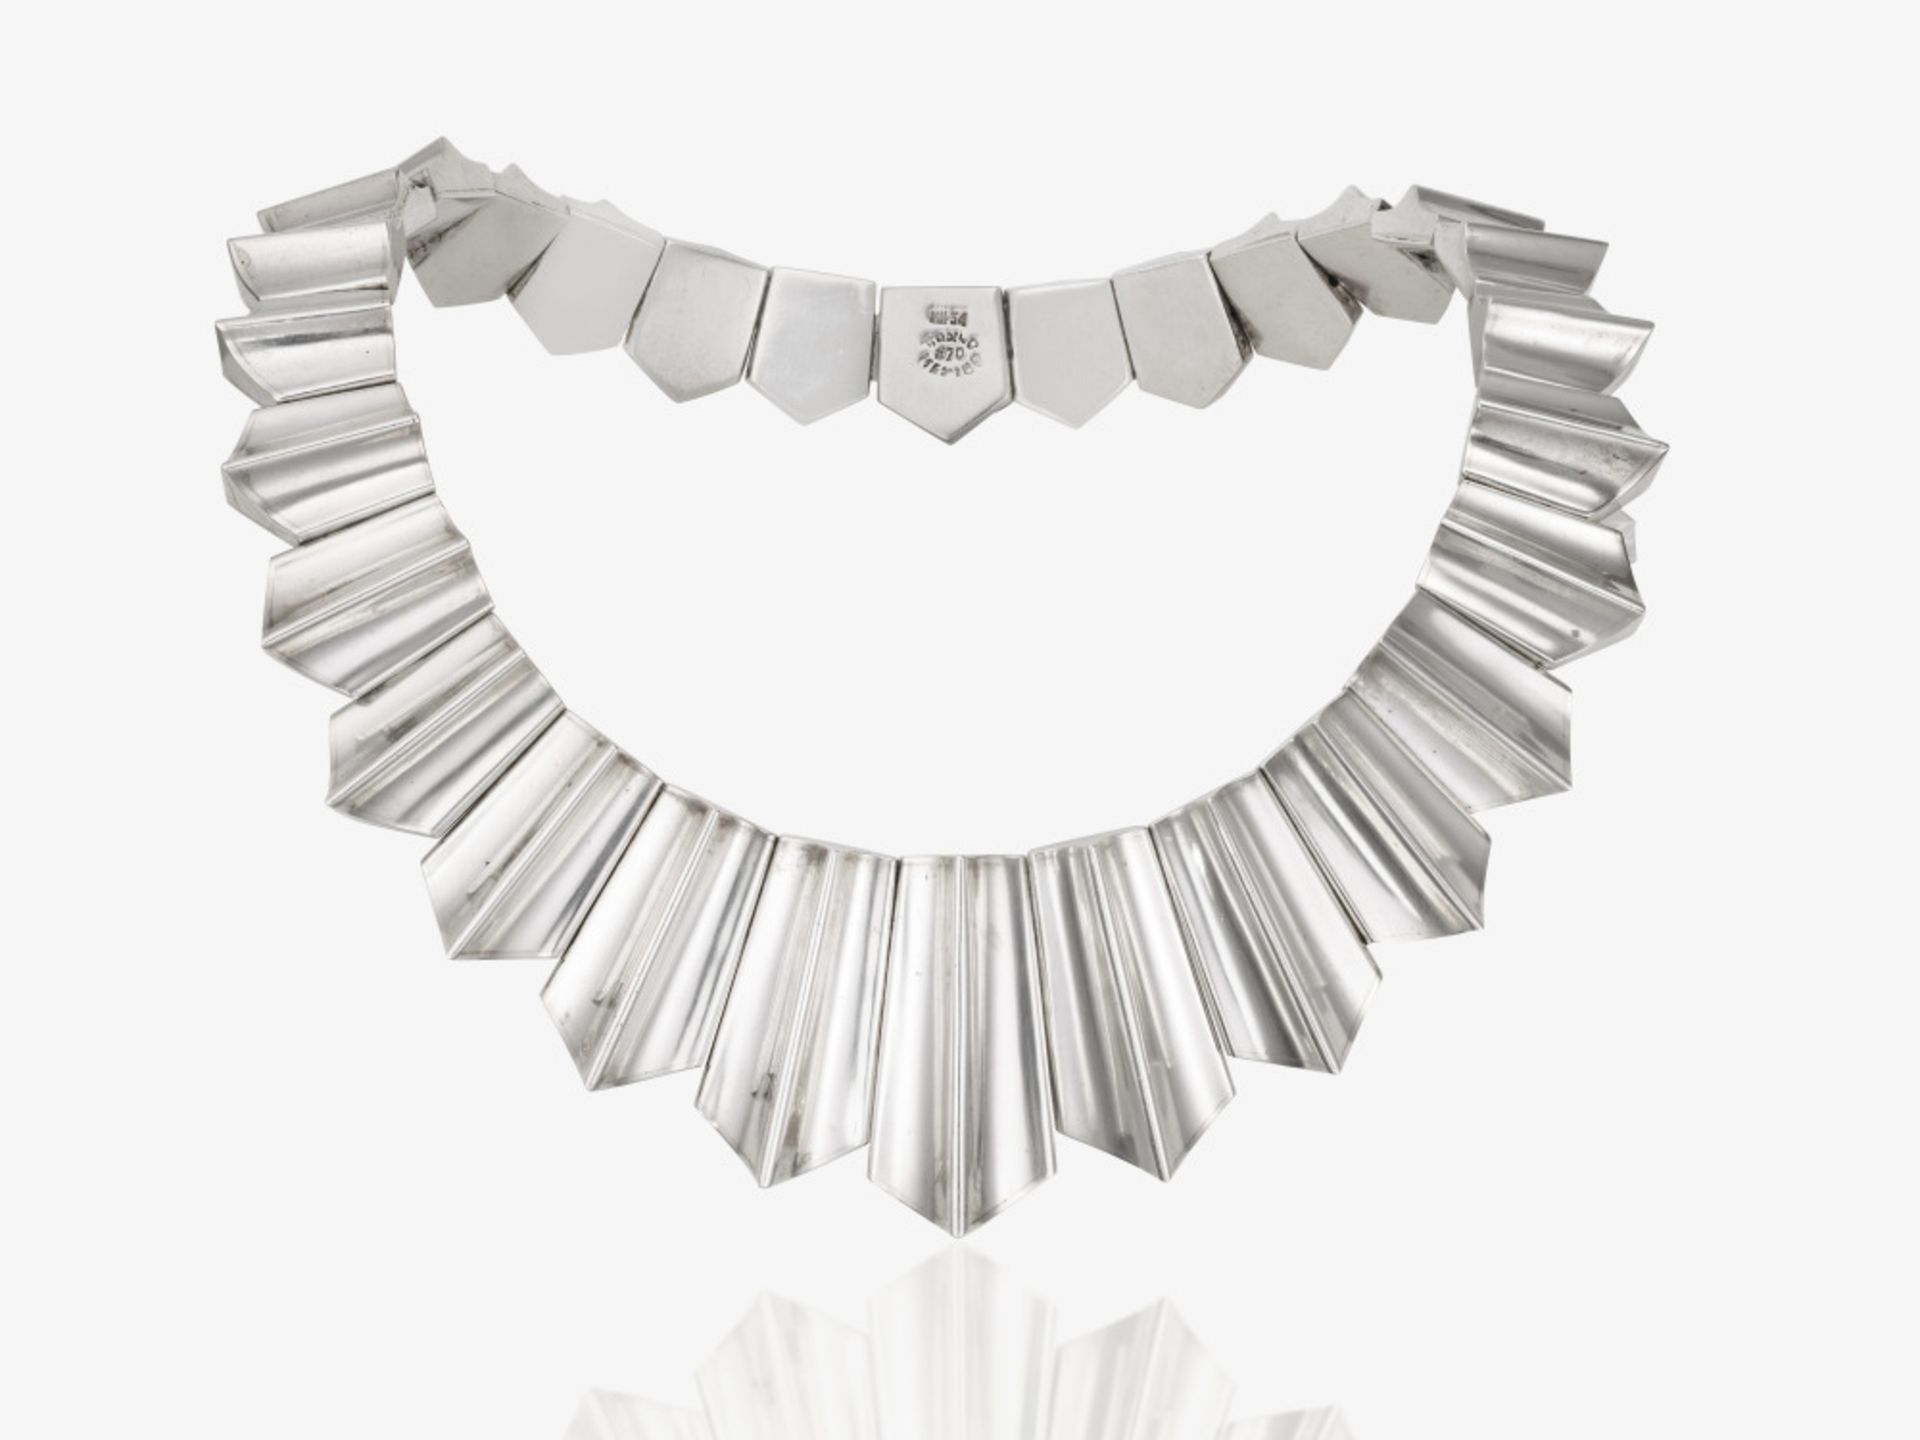 A Vintage choker necklace made of geometric, high-gloss silver - Mexico, Taxco, 1960s - 1970s